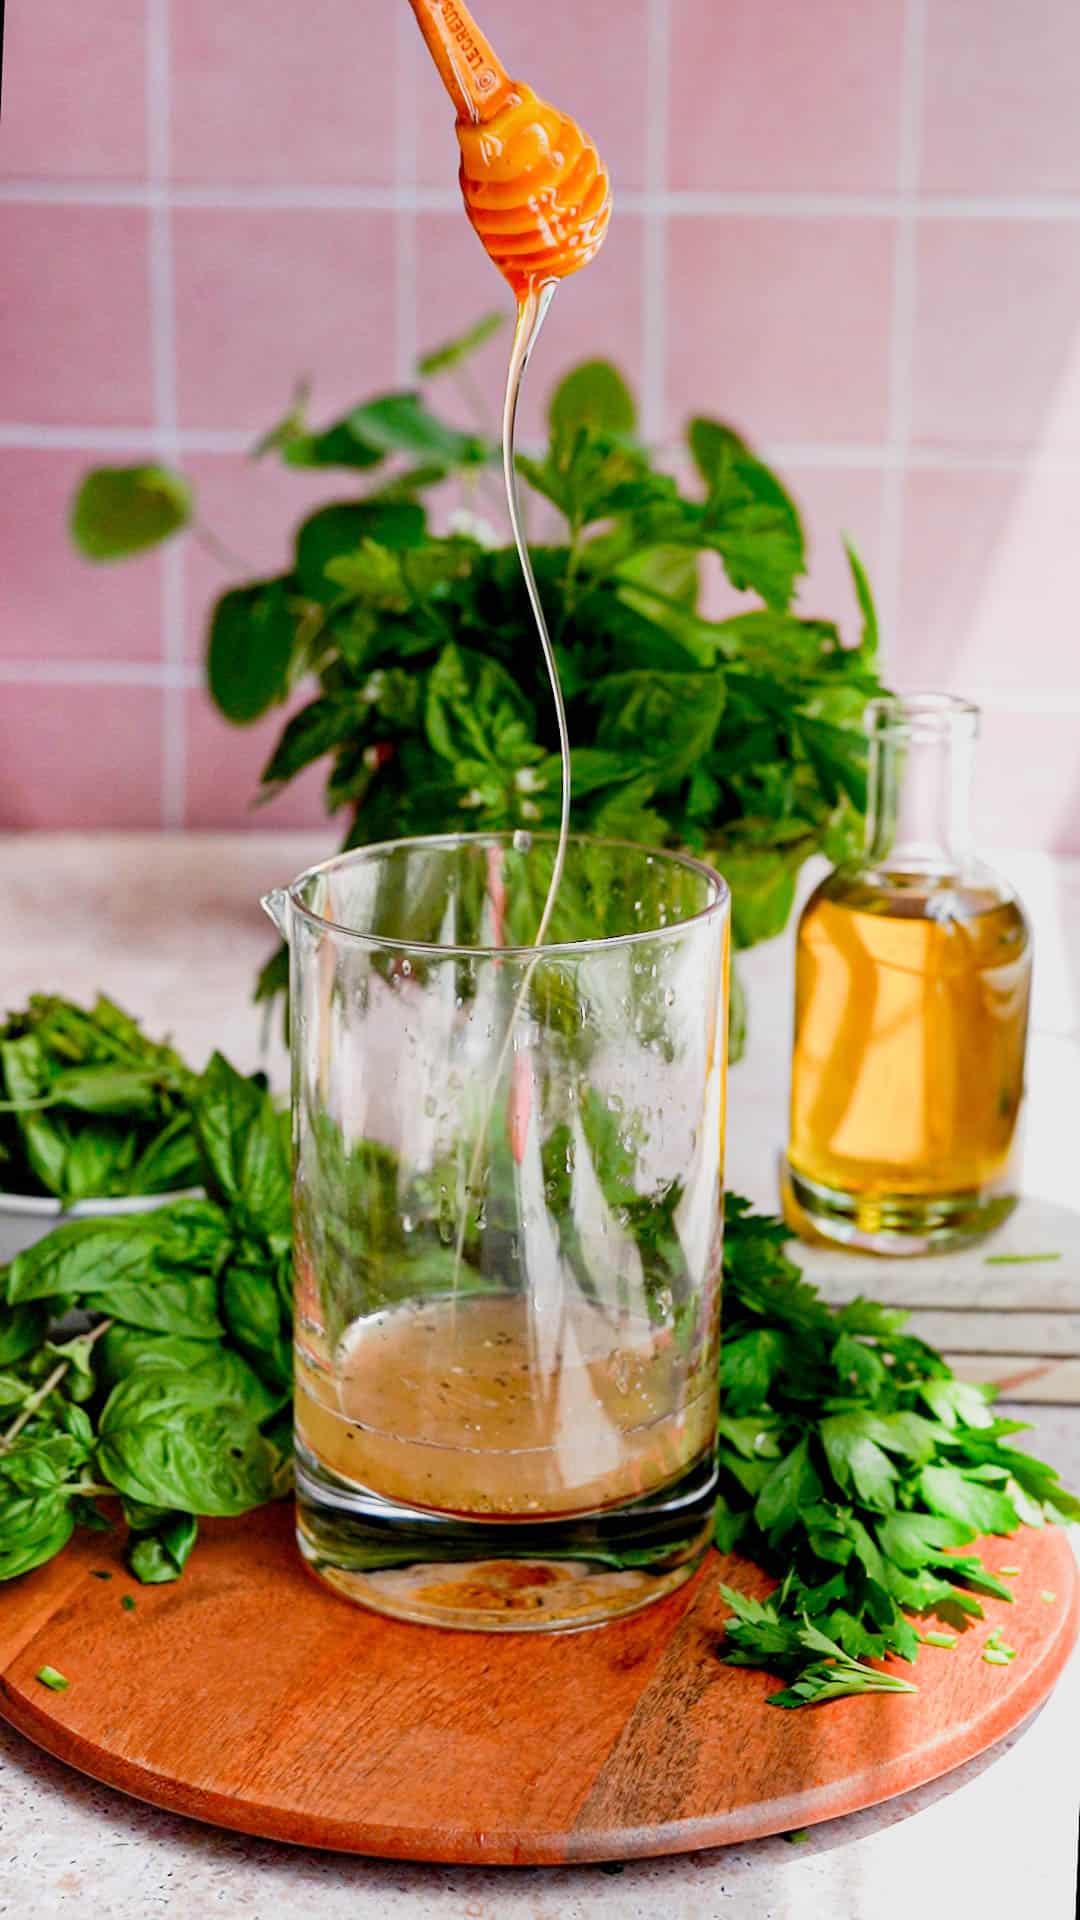 honey is being drizzled into a mixing glass filled with lemon juice and white wine vinegar to make a simple herb vinaigrette salad dressing.